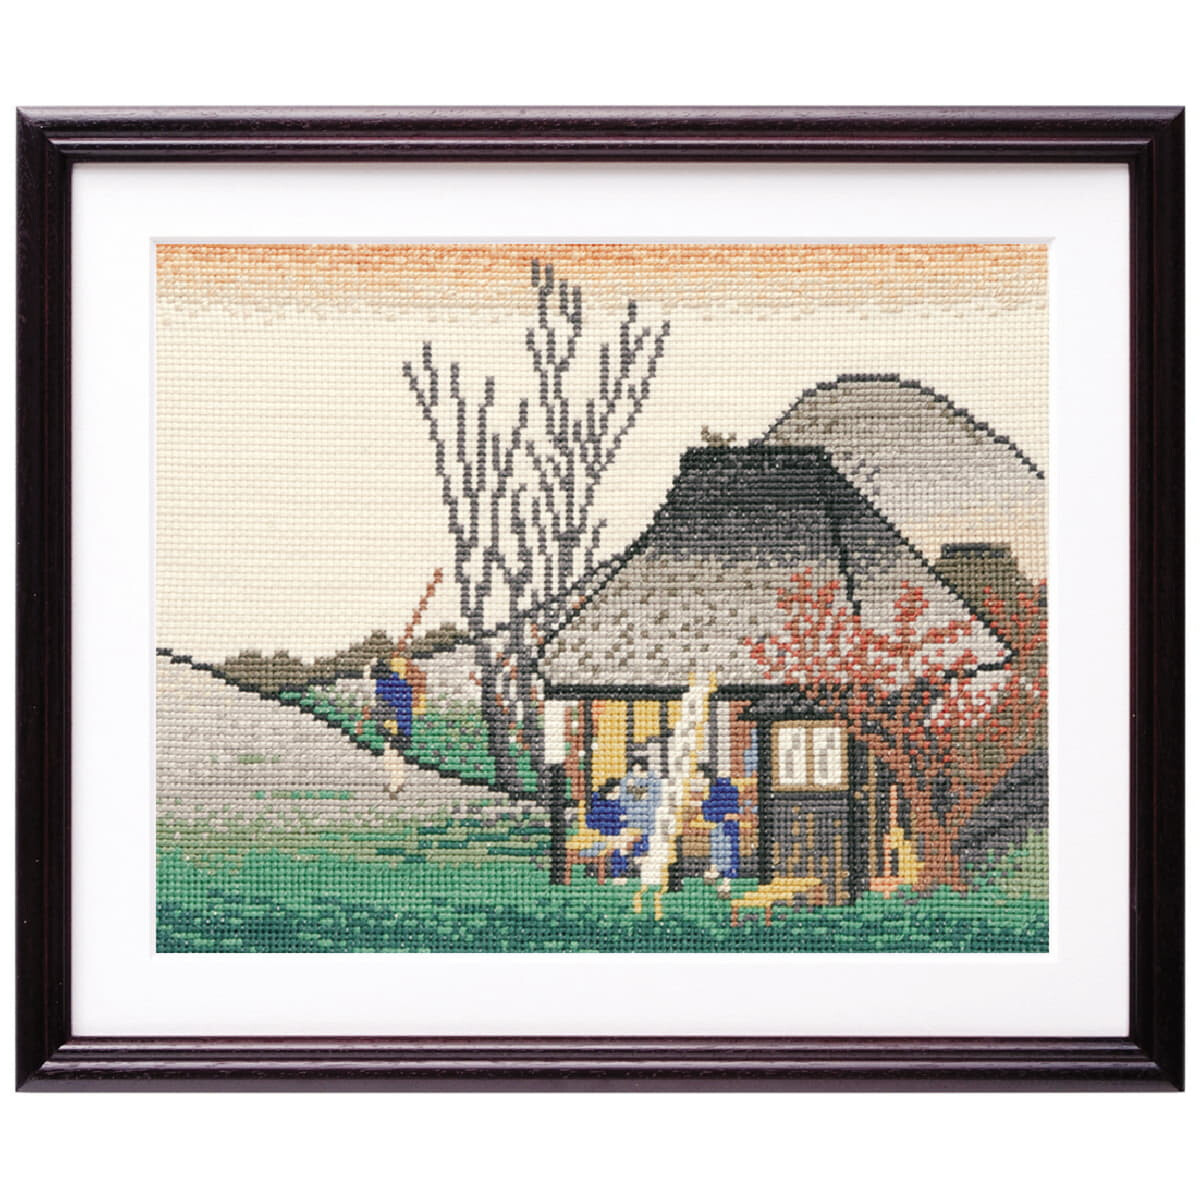 Olympus counted cross stitch kit "The Famous...